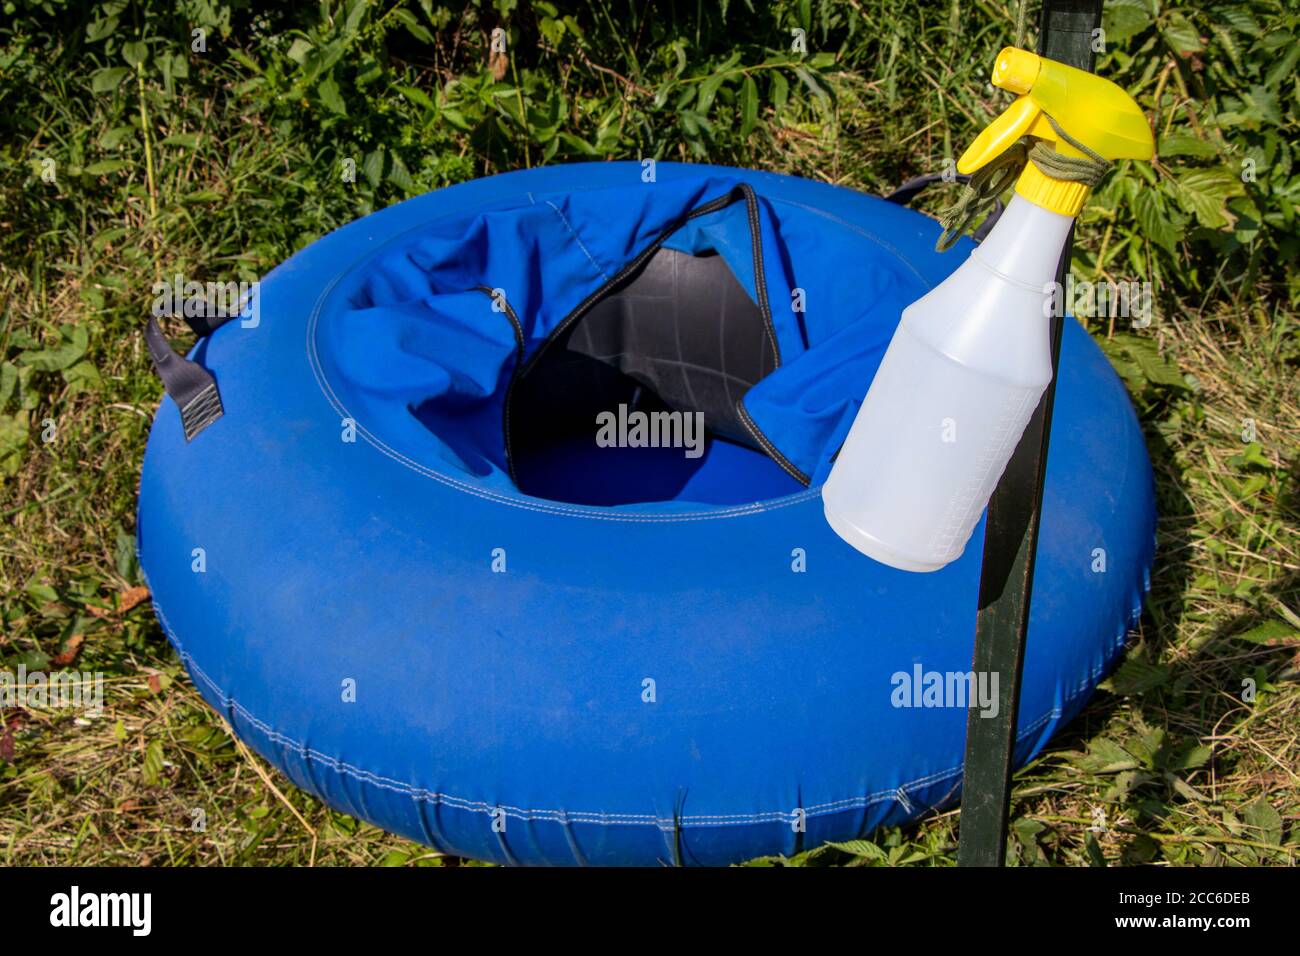 Blue Float River Tube and cleaner spay bottle for disinfecting after use due to COVID-19 Coronavirus Pandemic in summer 2020, sanitary measures Stock Photo